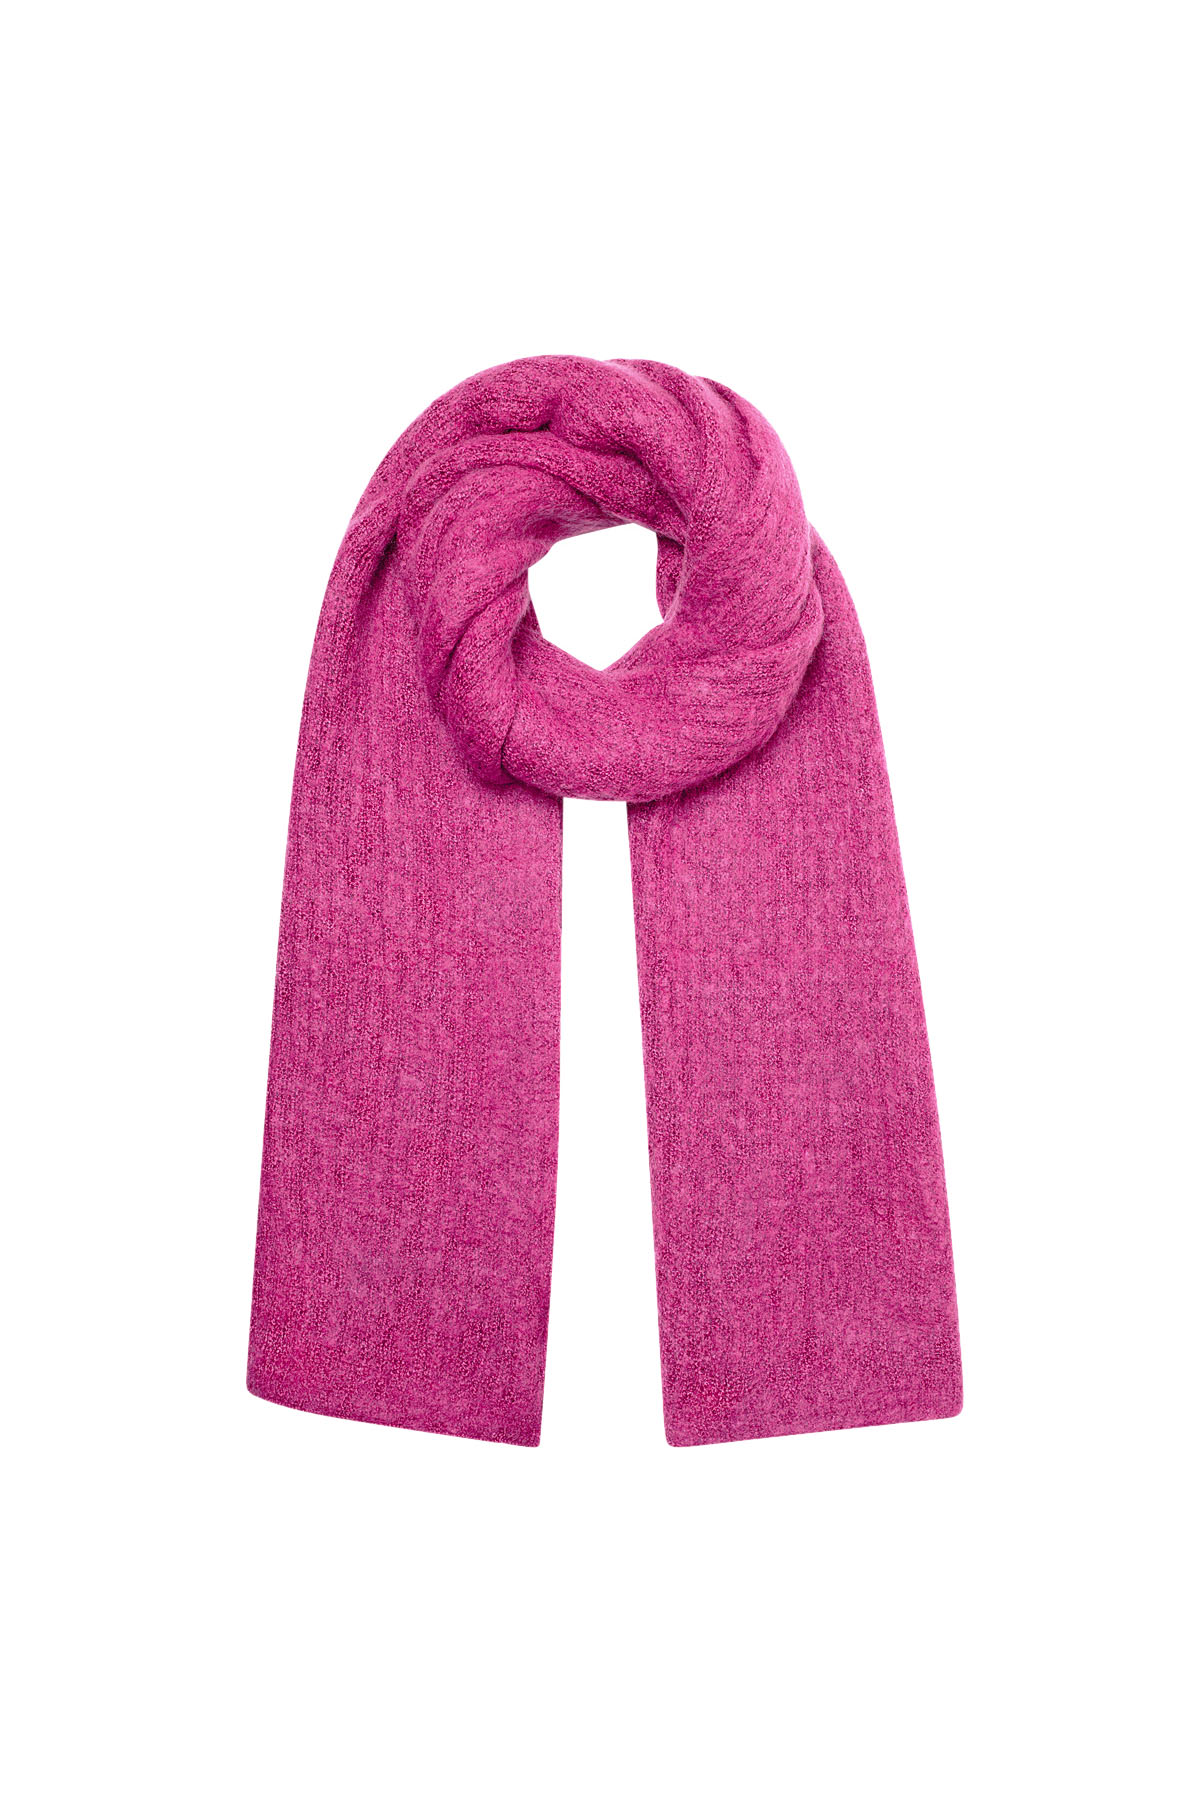 Scarf knitted plain - pink h5 